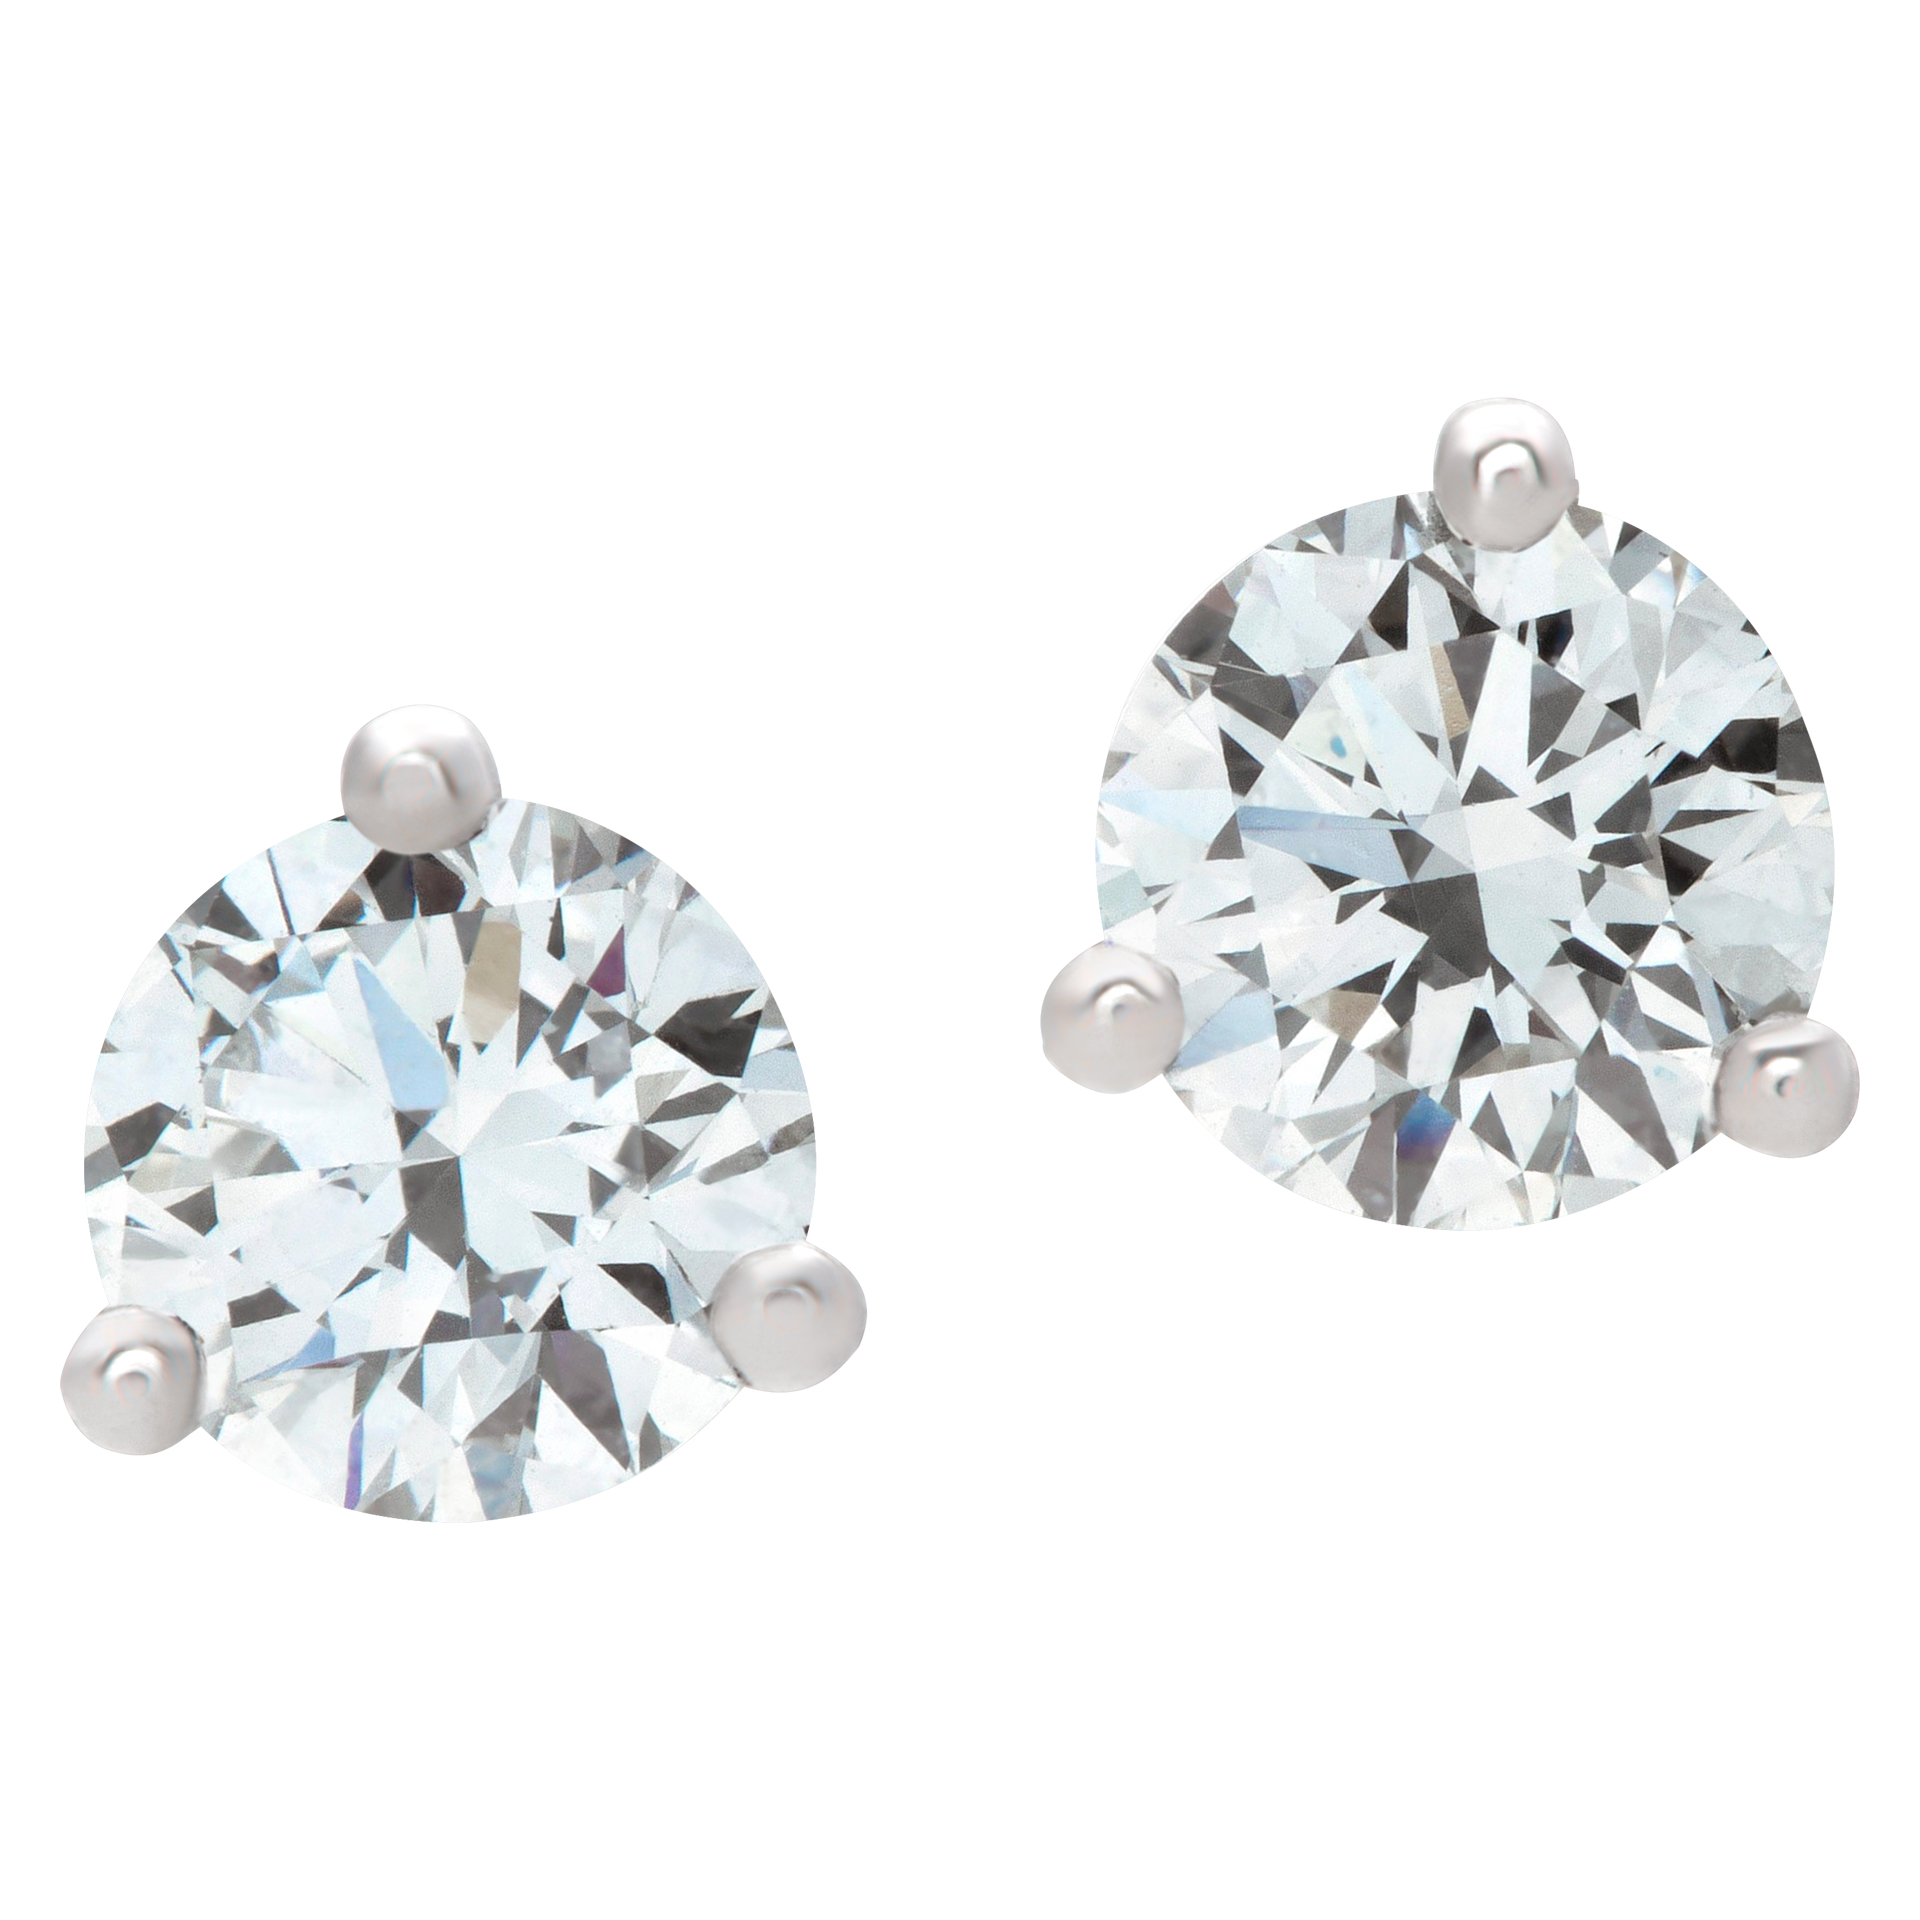 GIA certified round brilliant cut diamond stud earrings set in 18k white gold "Martini" mounting